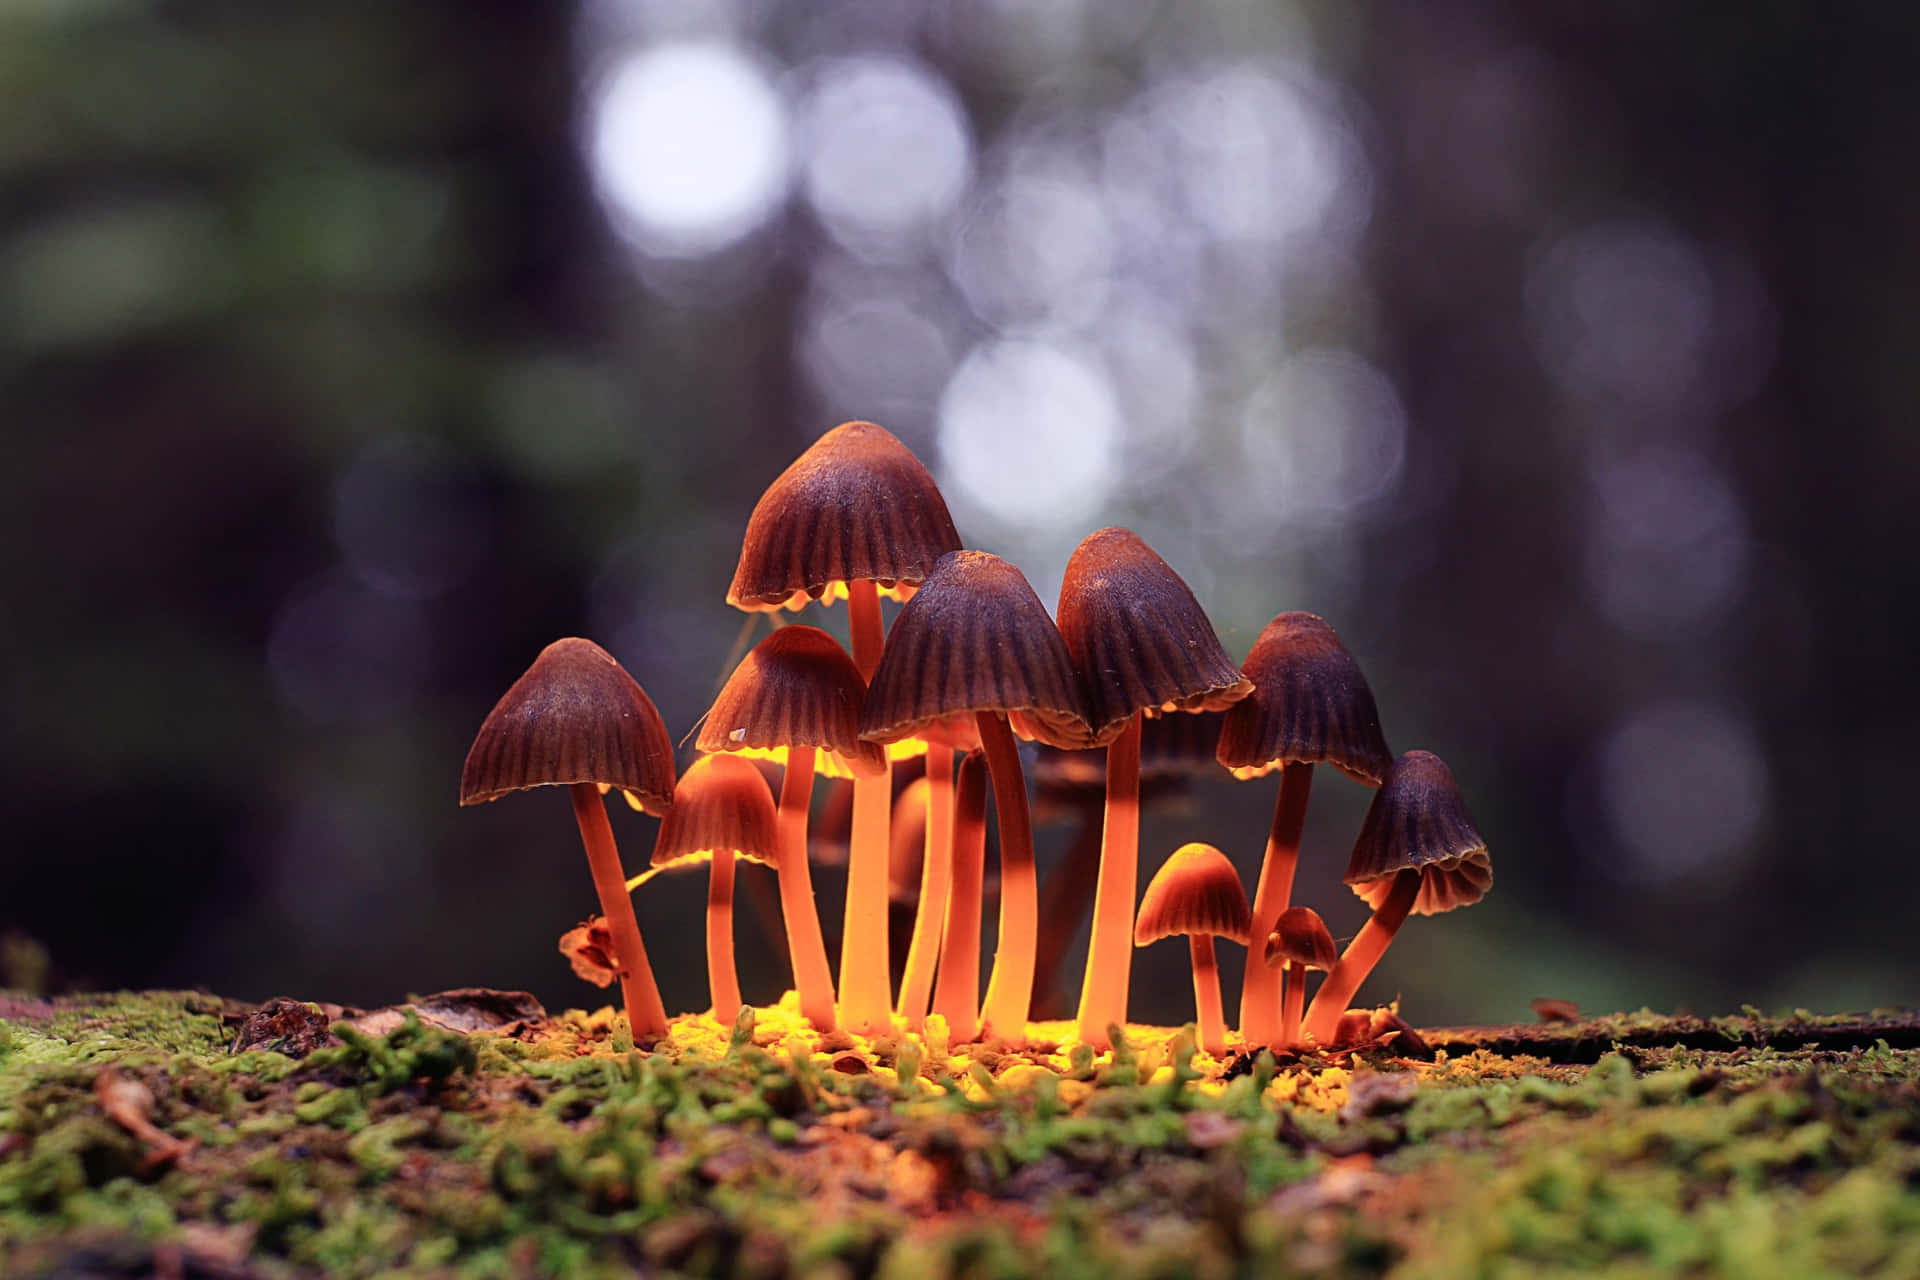 A strange and colourful magic mushroom deep in an enchanted forest.